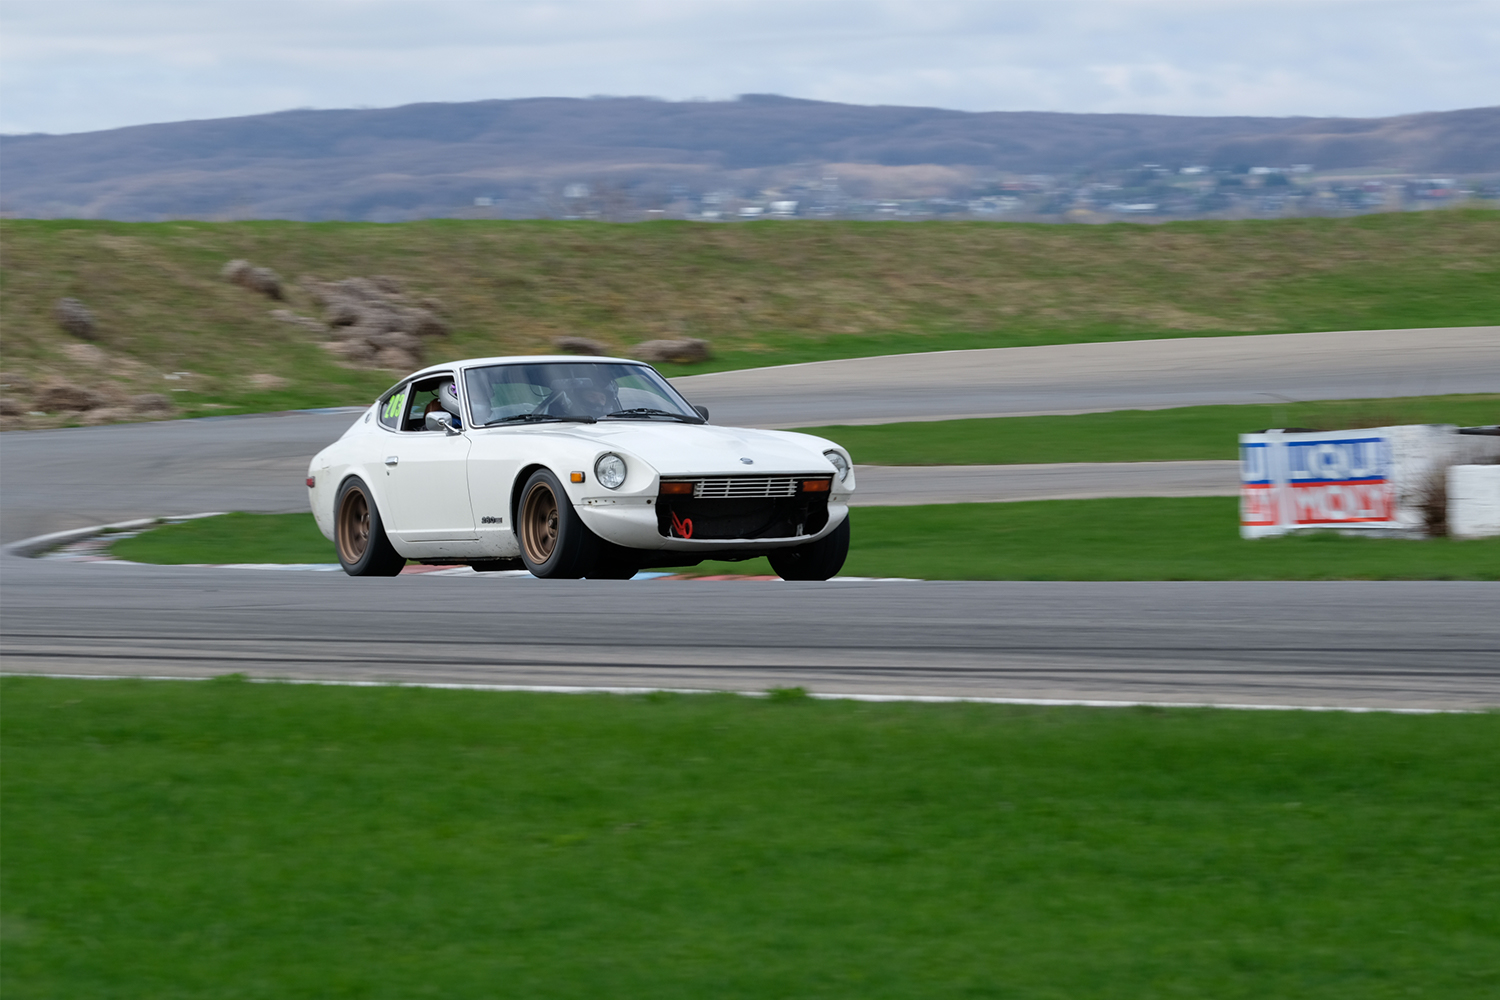 The author driving his white 1978 Datsun 280Z car on a racetrack. He bought the classic car to drive on track days.